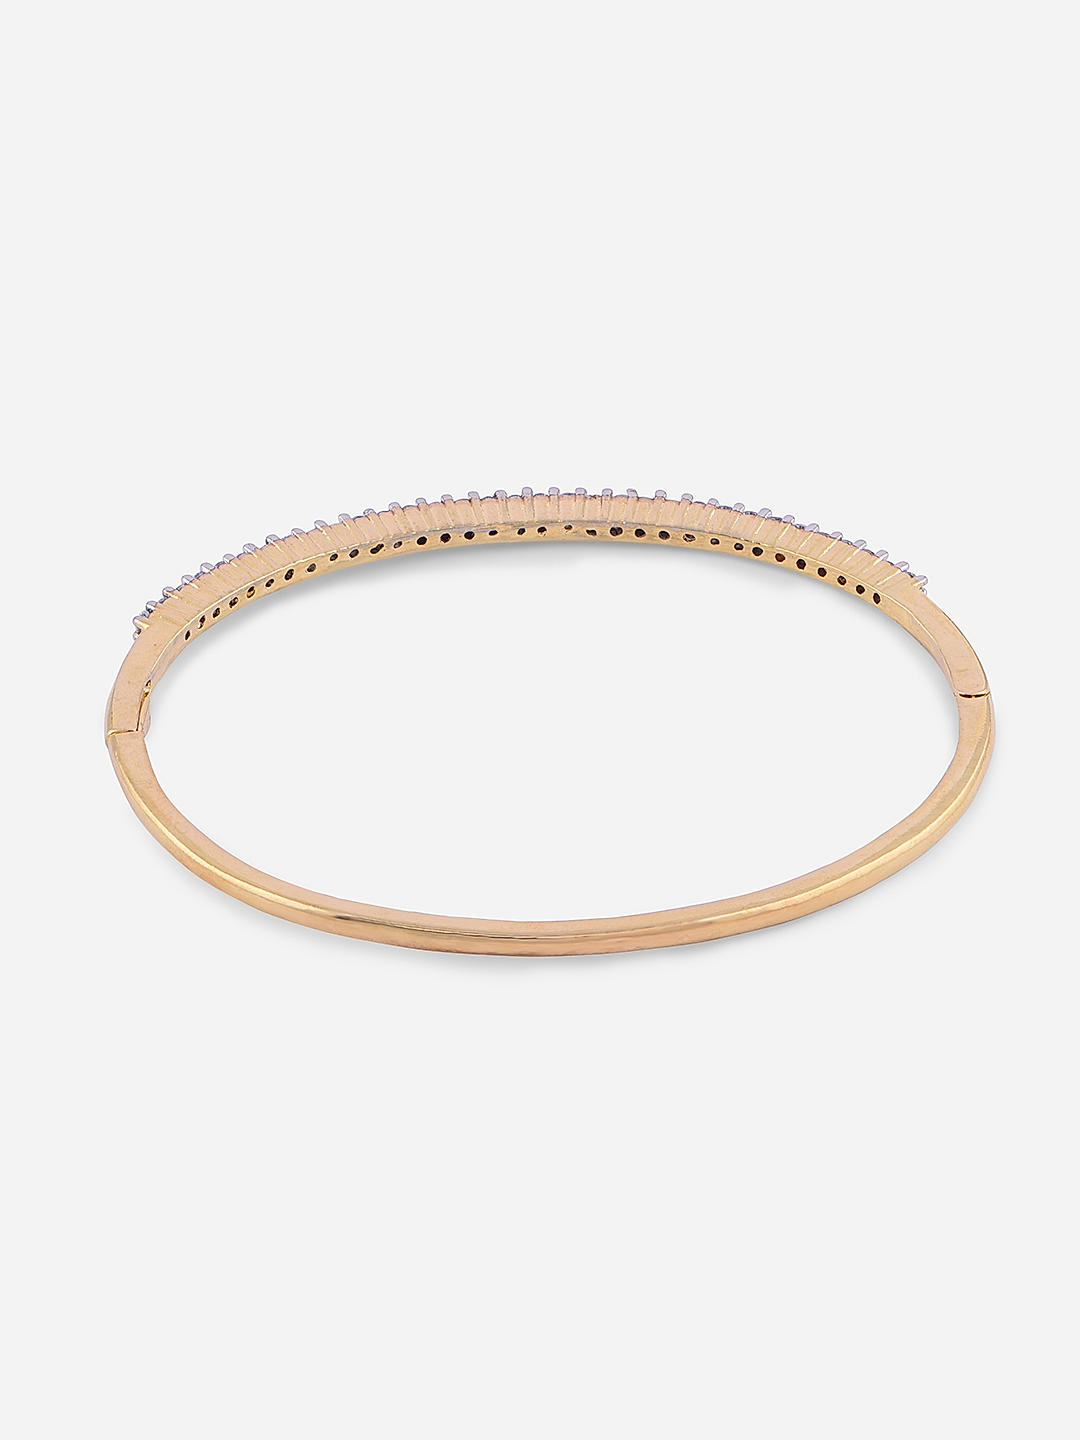 Thick Hammered Cuff Bracelets, Gold, Rose Gold, Silver (352.y.r.s.3) –  smallcombestudio